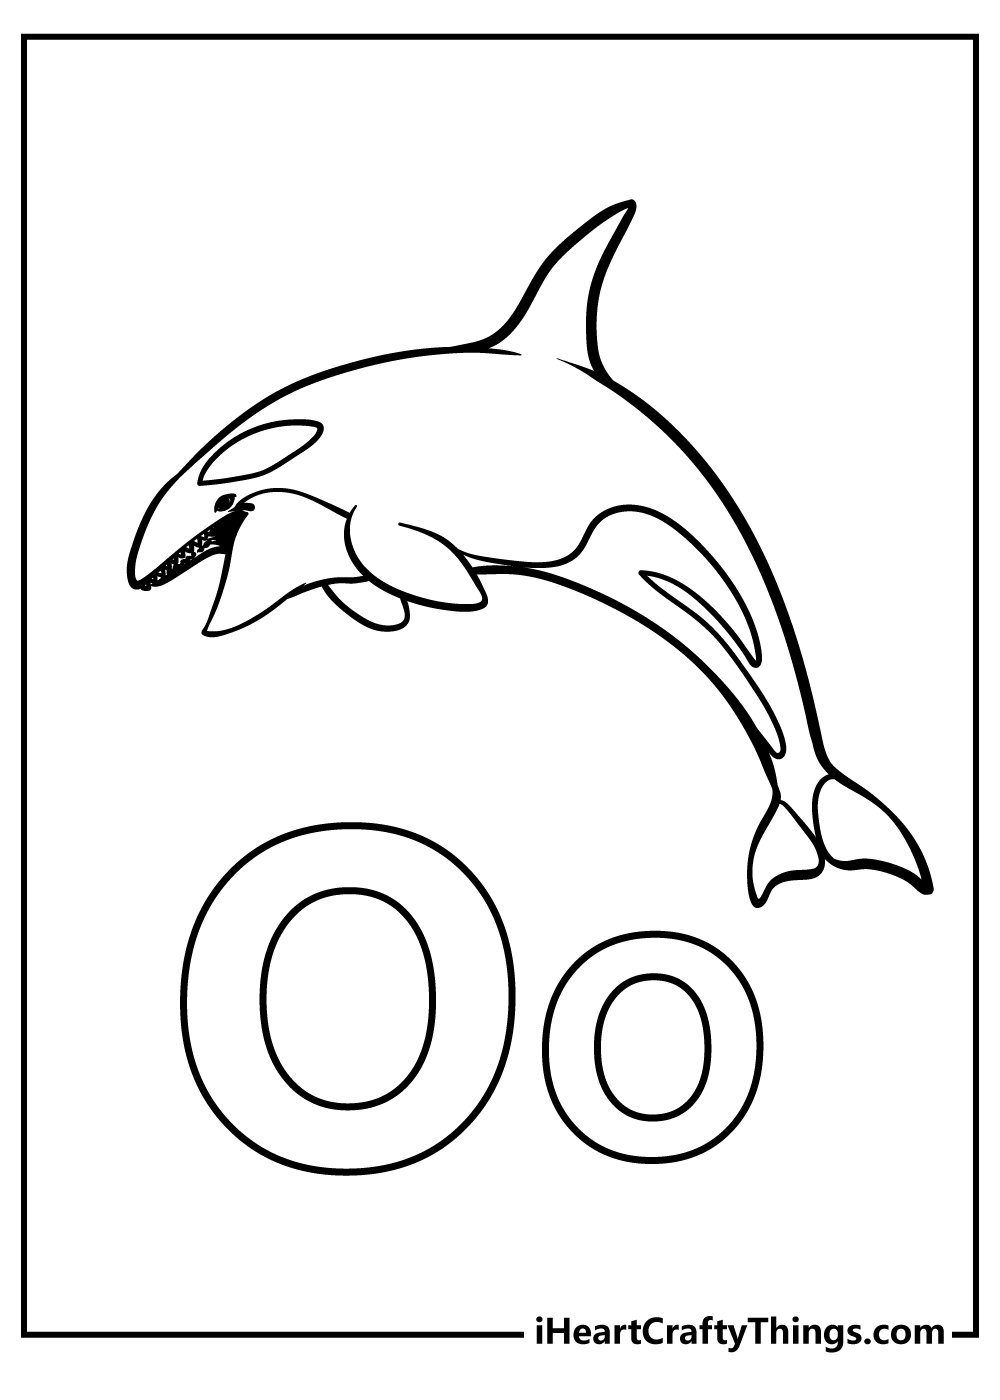 Letter O Coloring Book for kids free printable